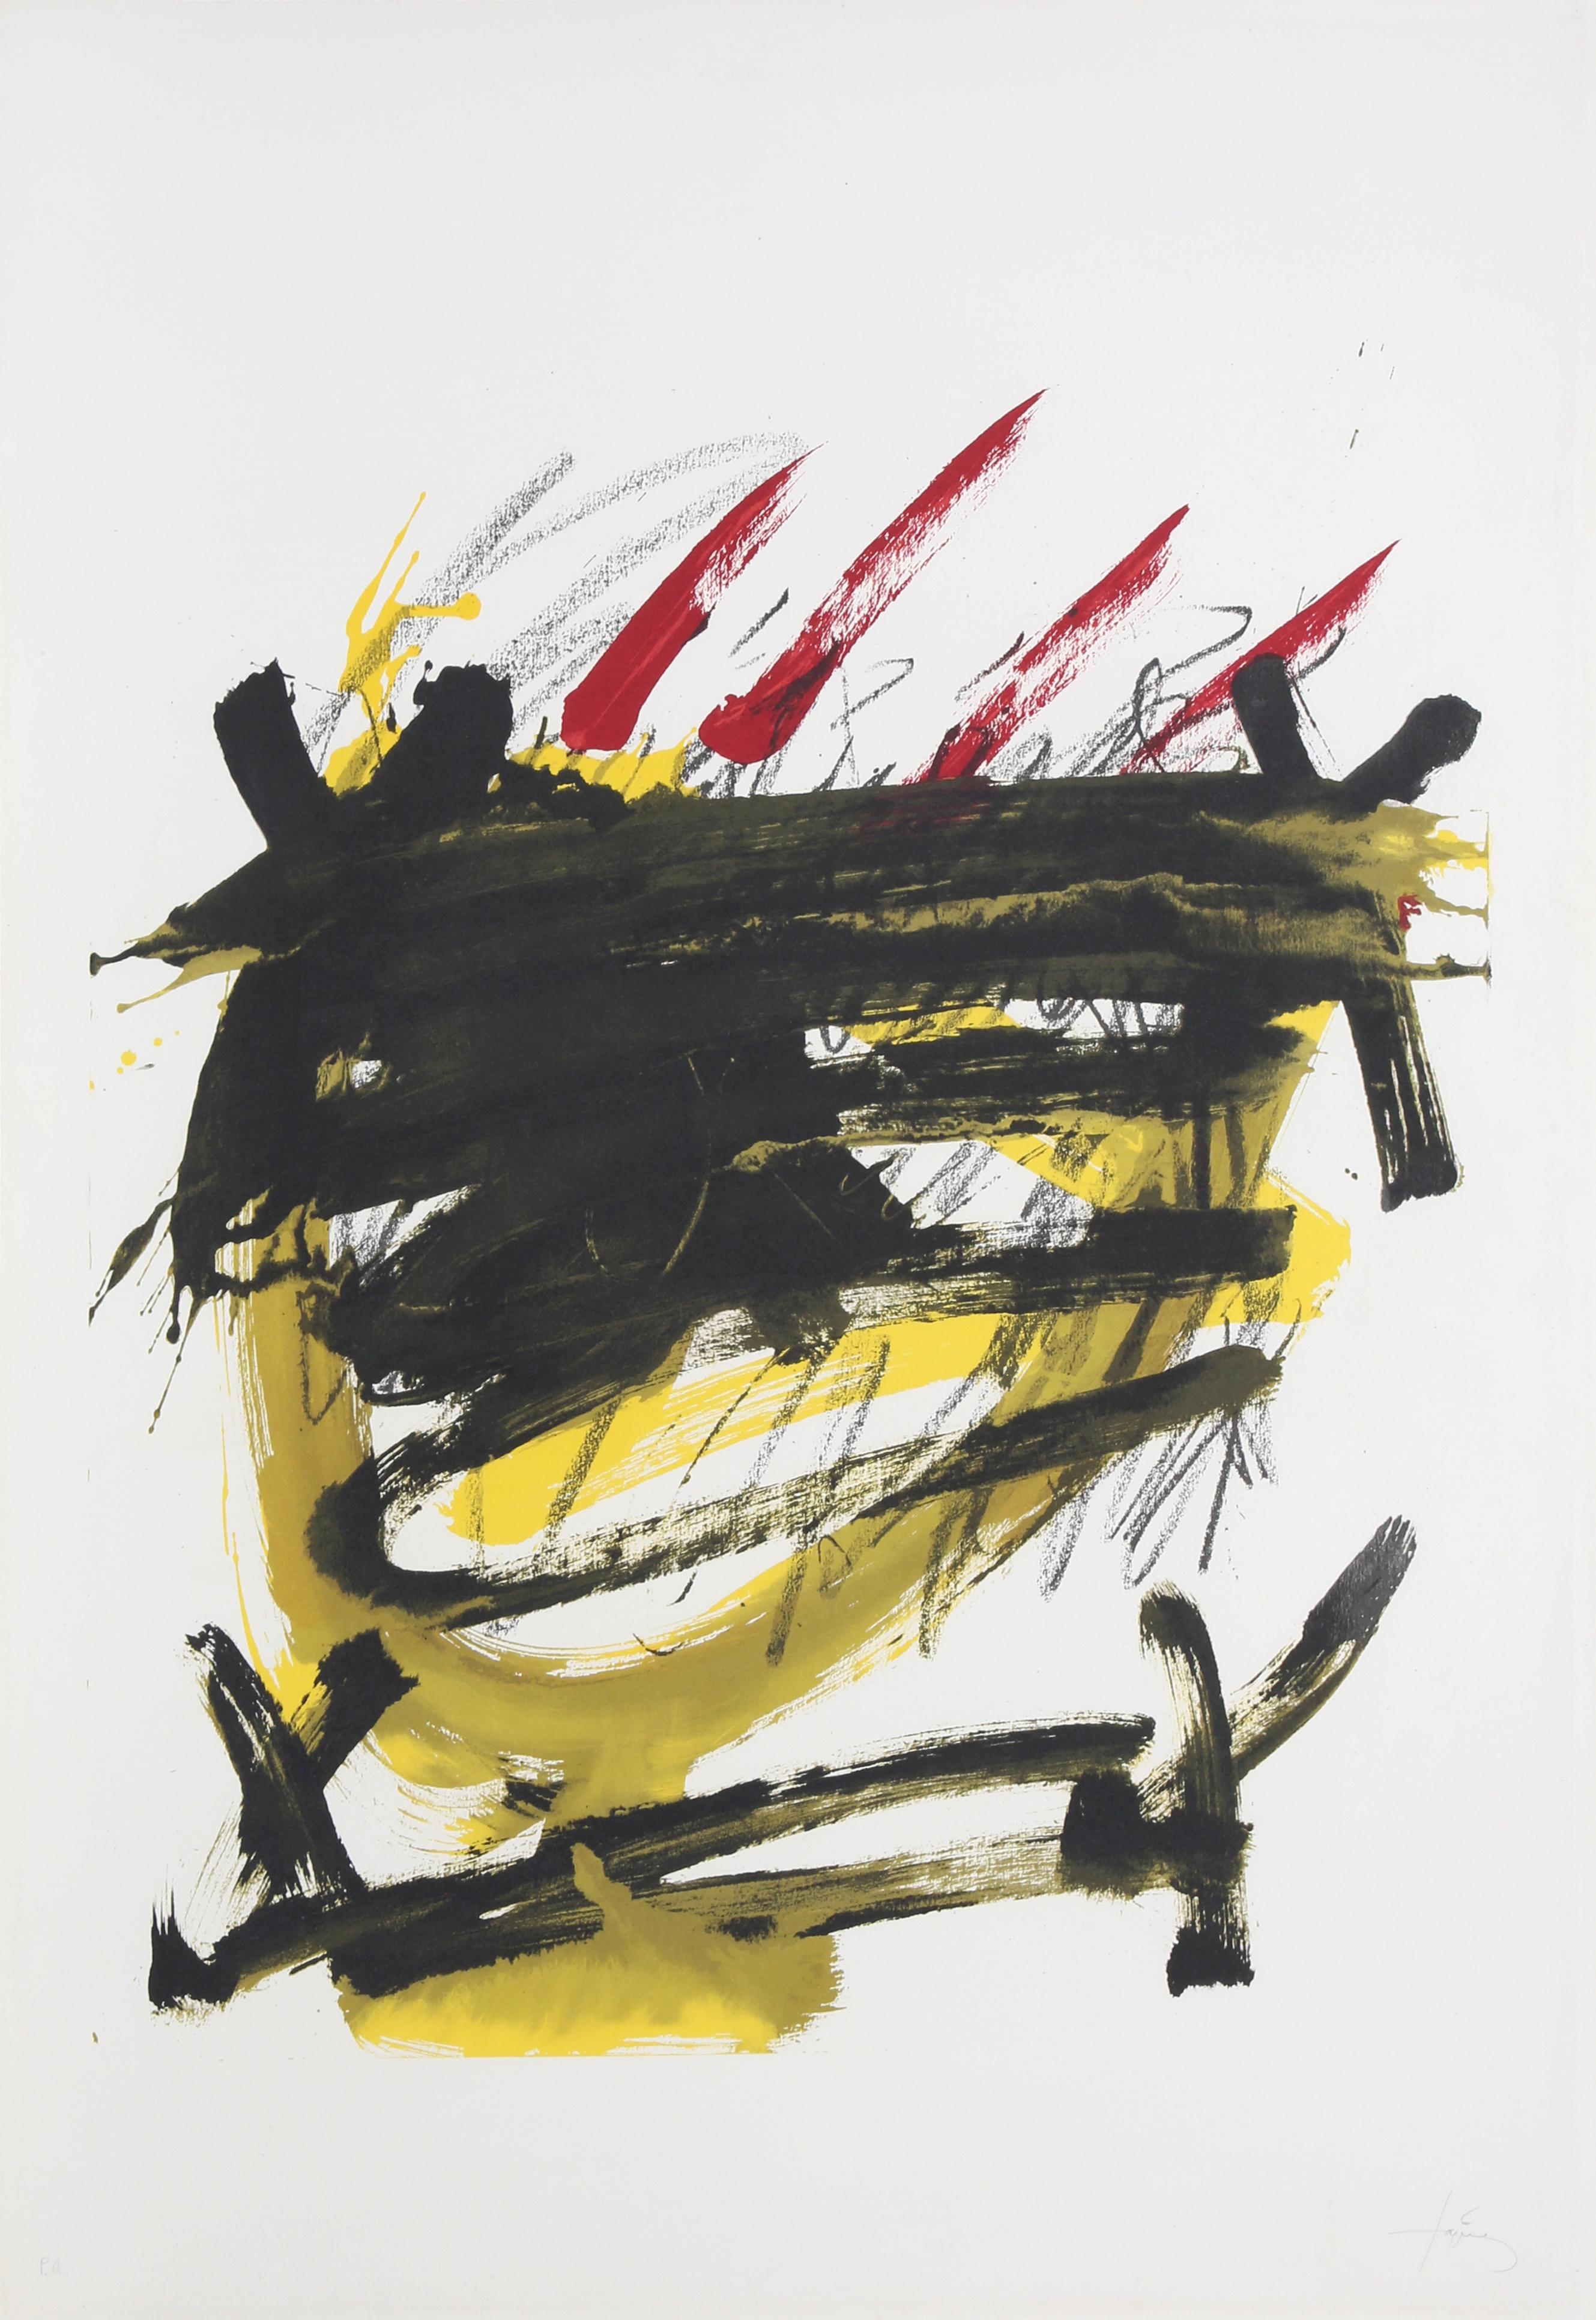 No. 4 from "Als Mesters de Catalunya, " Lithograph by Antoni Tapies, 1974